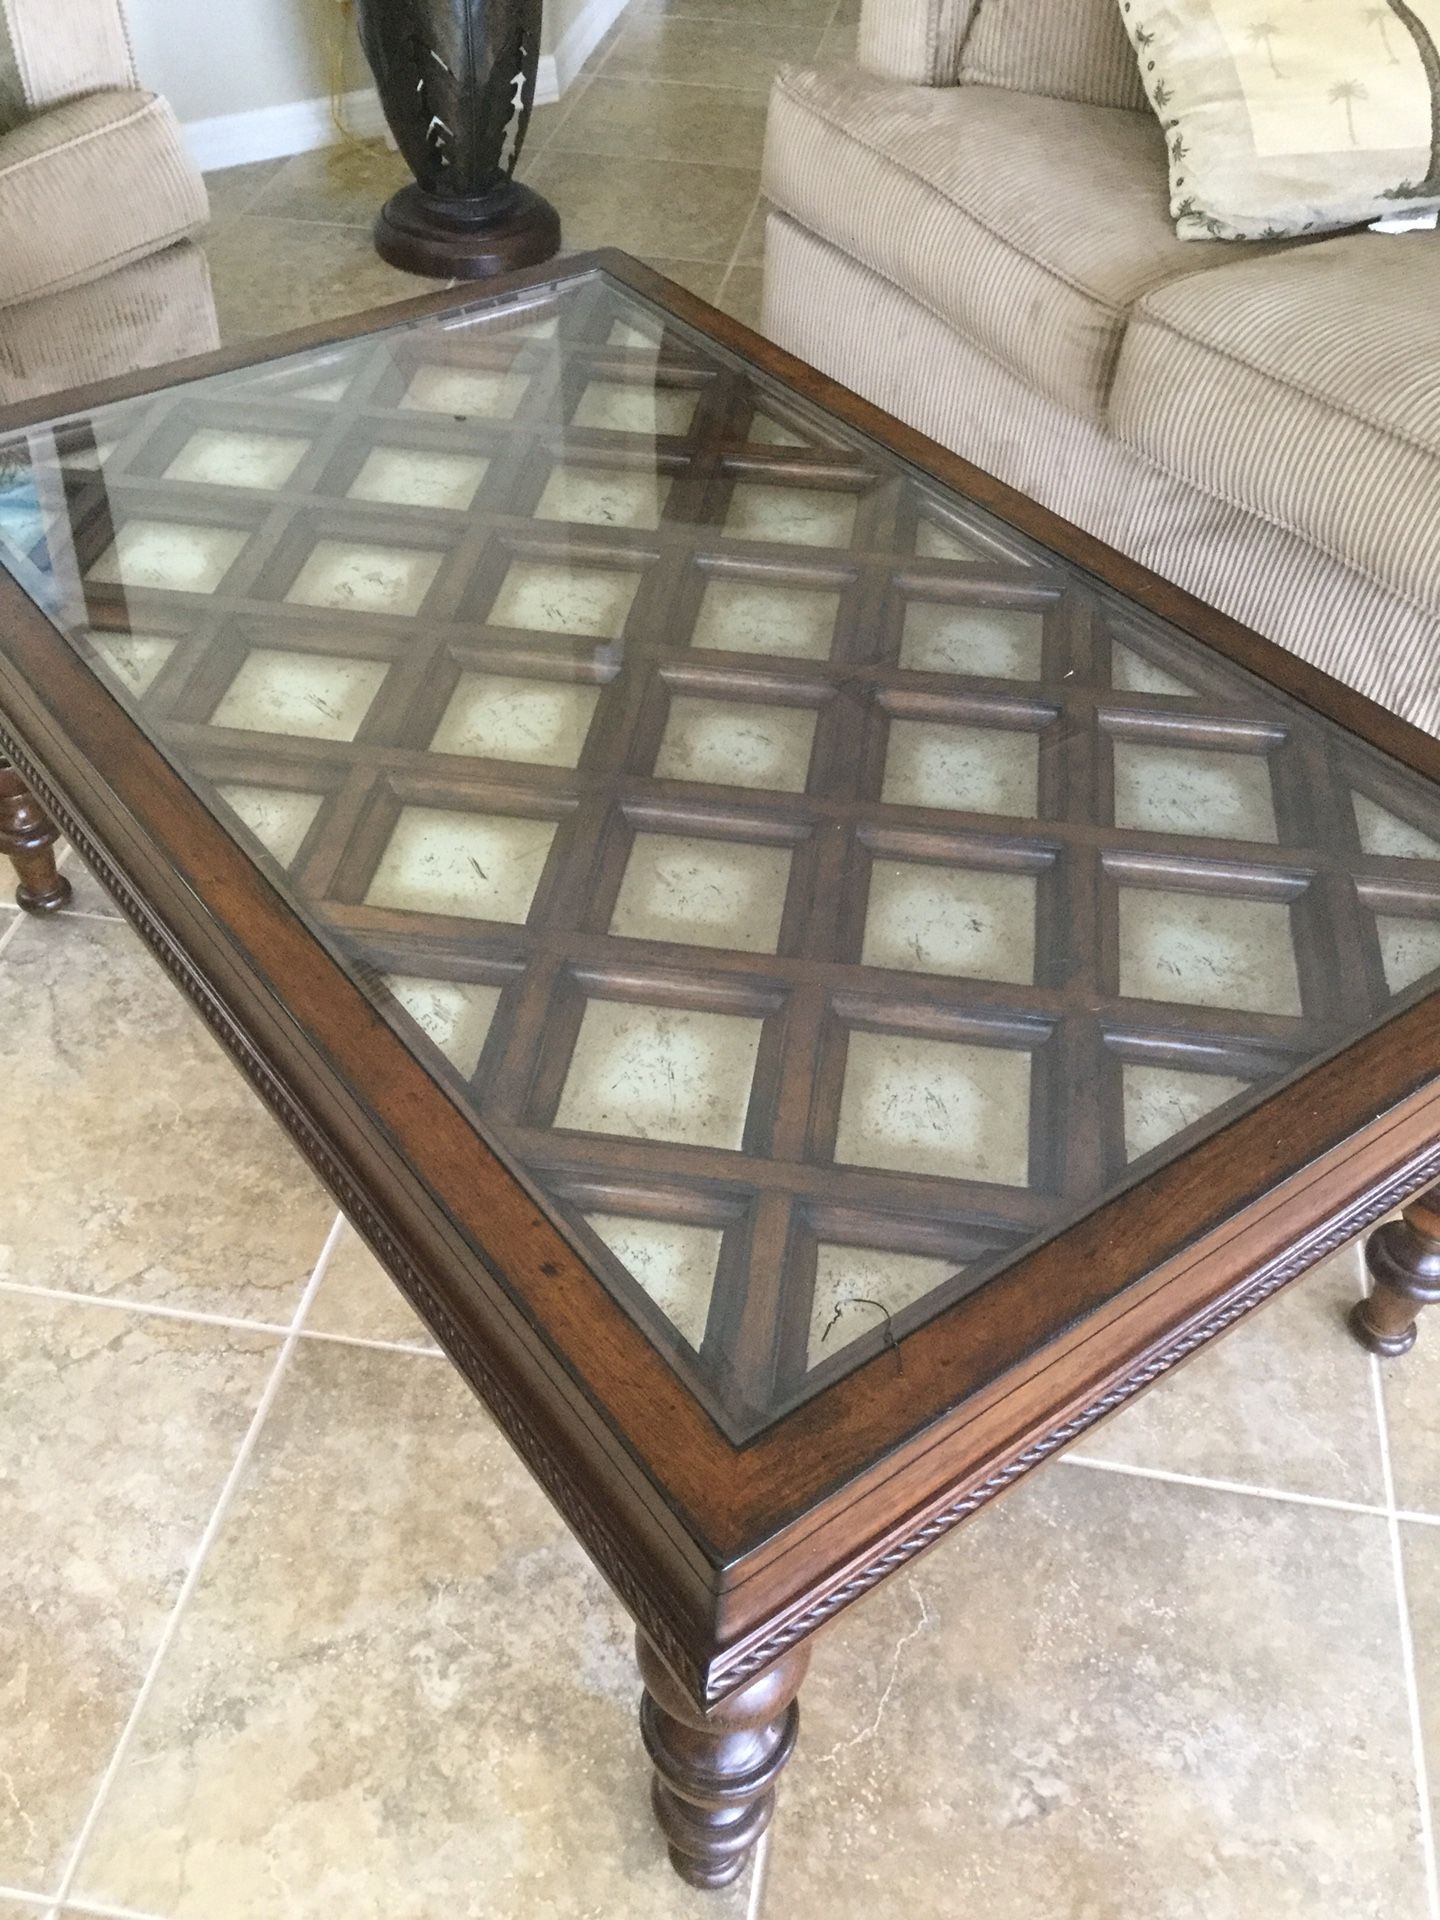 Wood and glass coffee table with pull out table